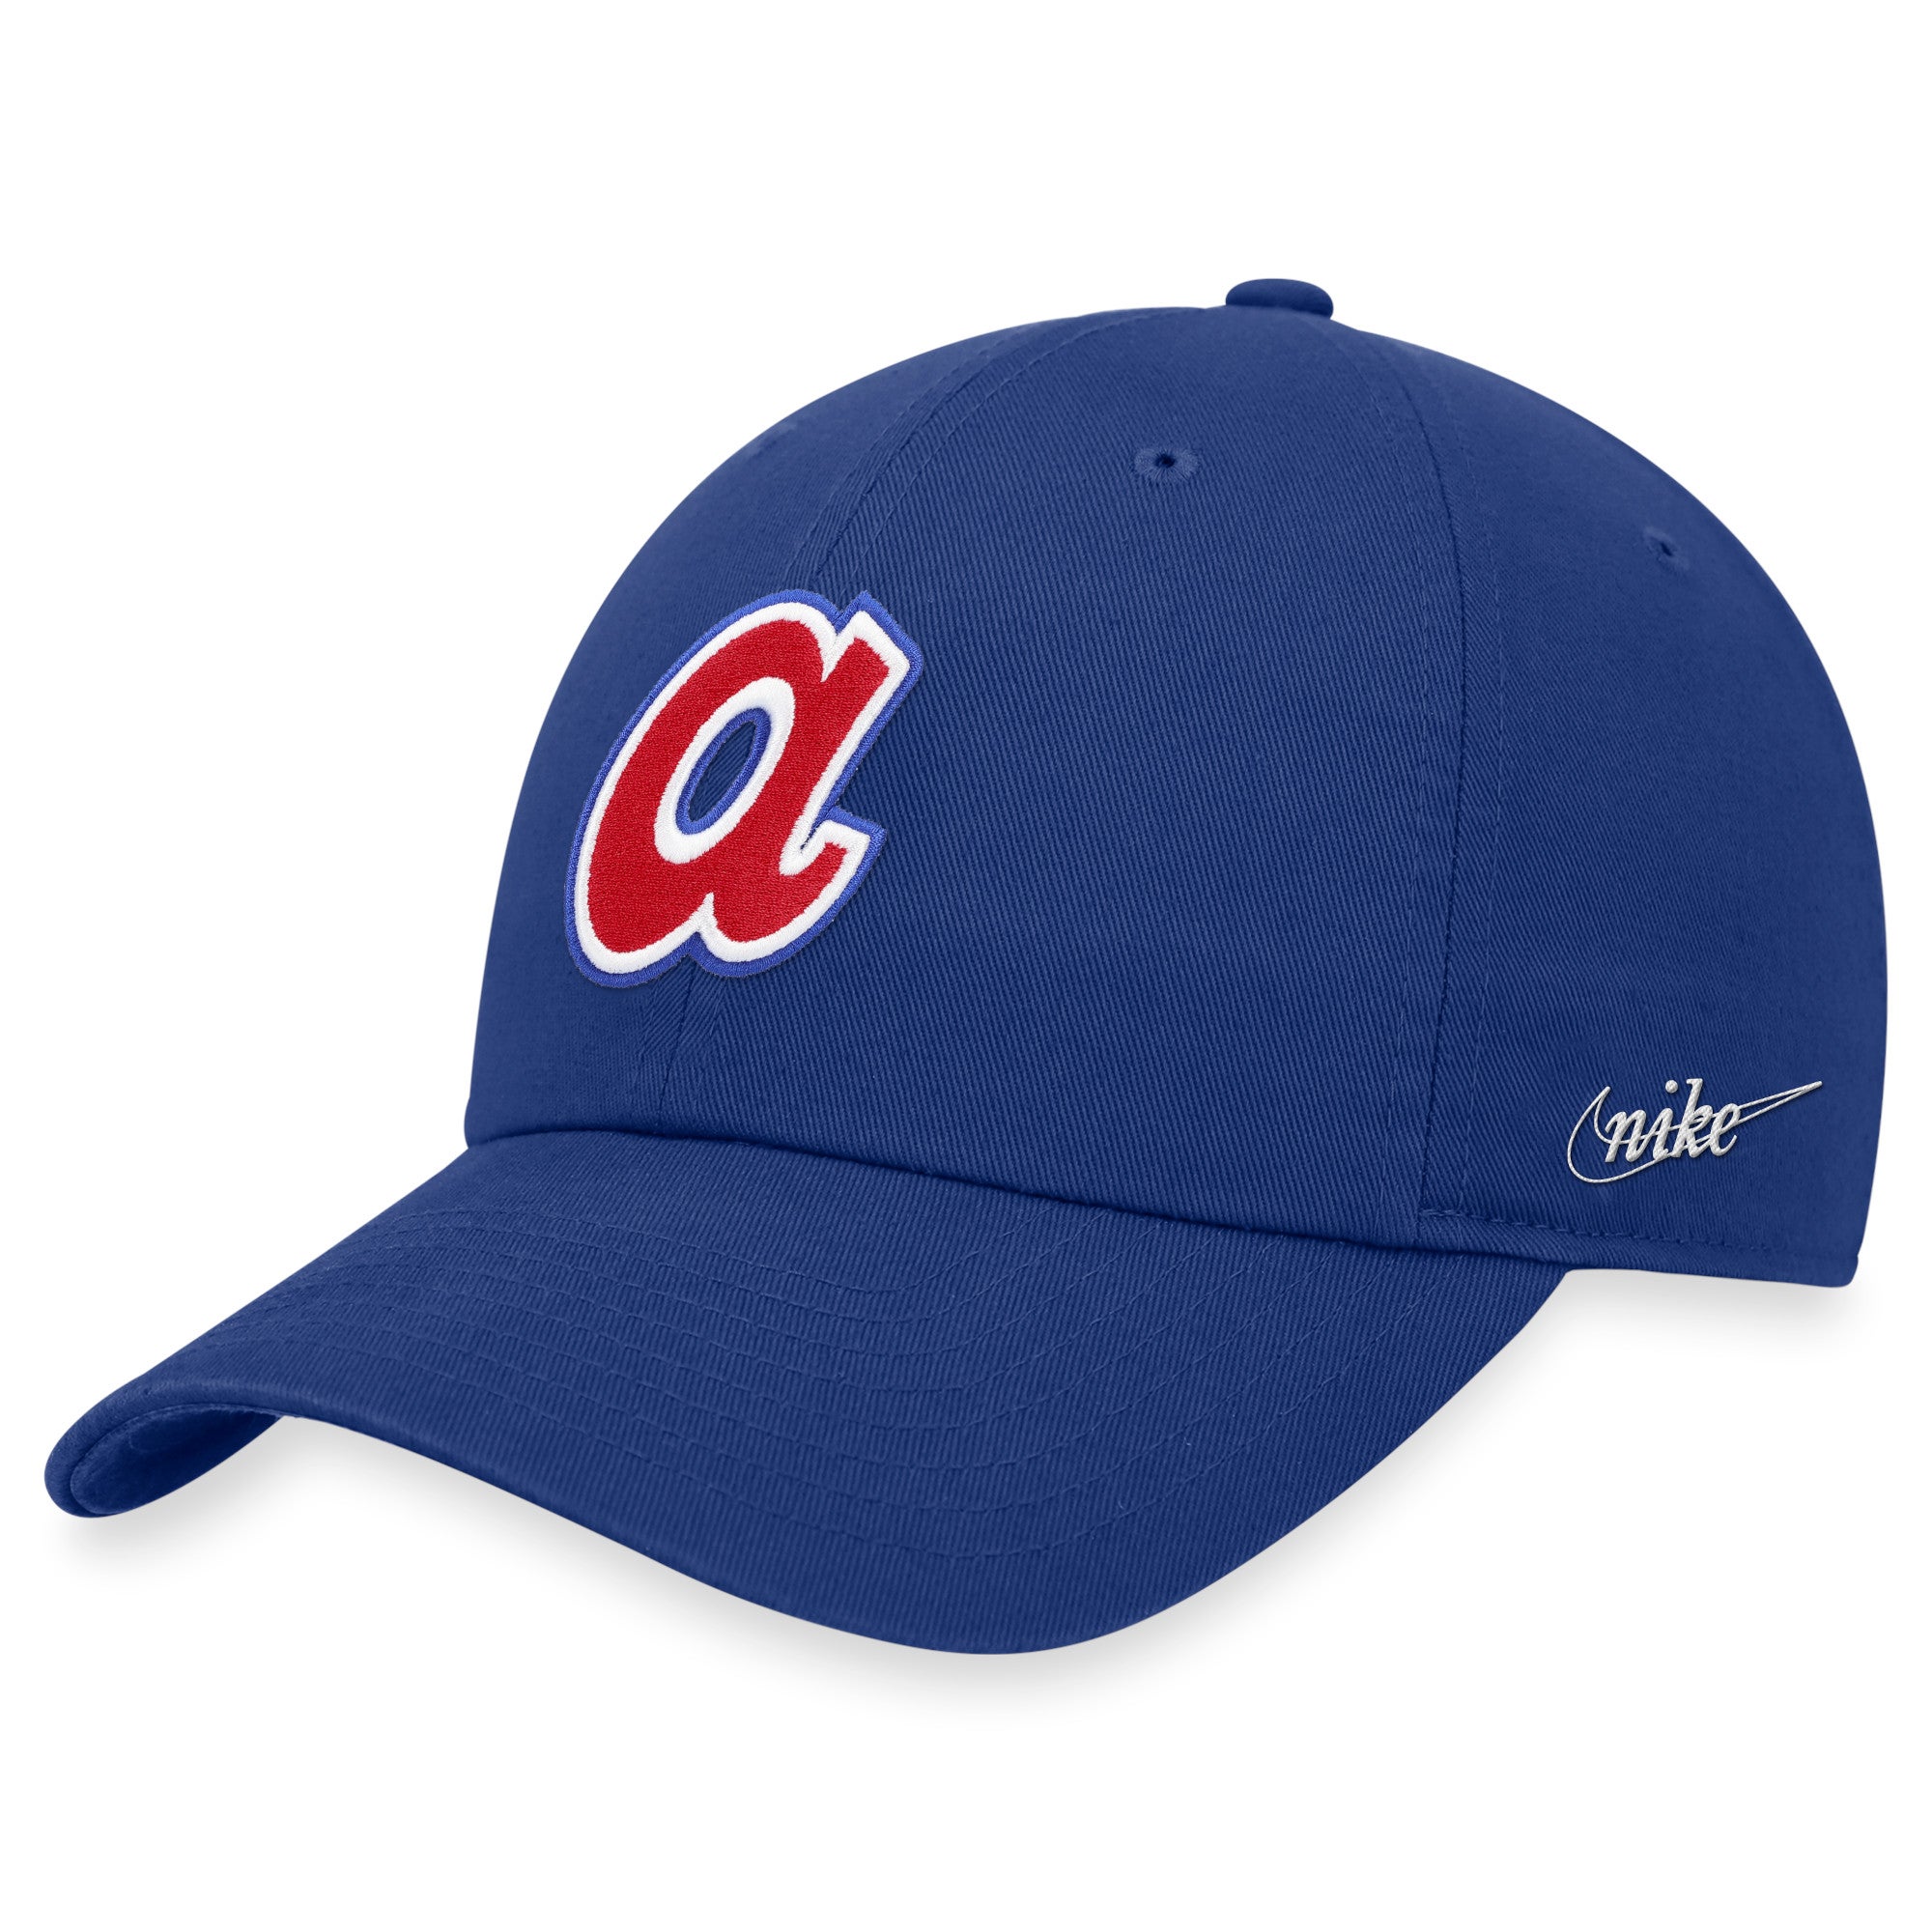  Atlanta Braves Blue Cooperstown Clean Up Adjustable Hat, Adult  One Size Fits All : Sports & Outdoors